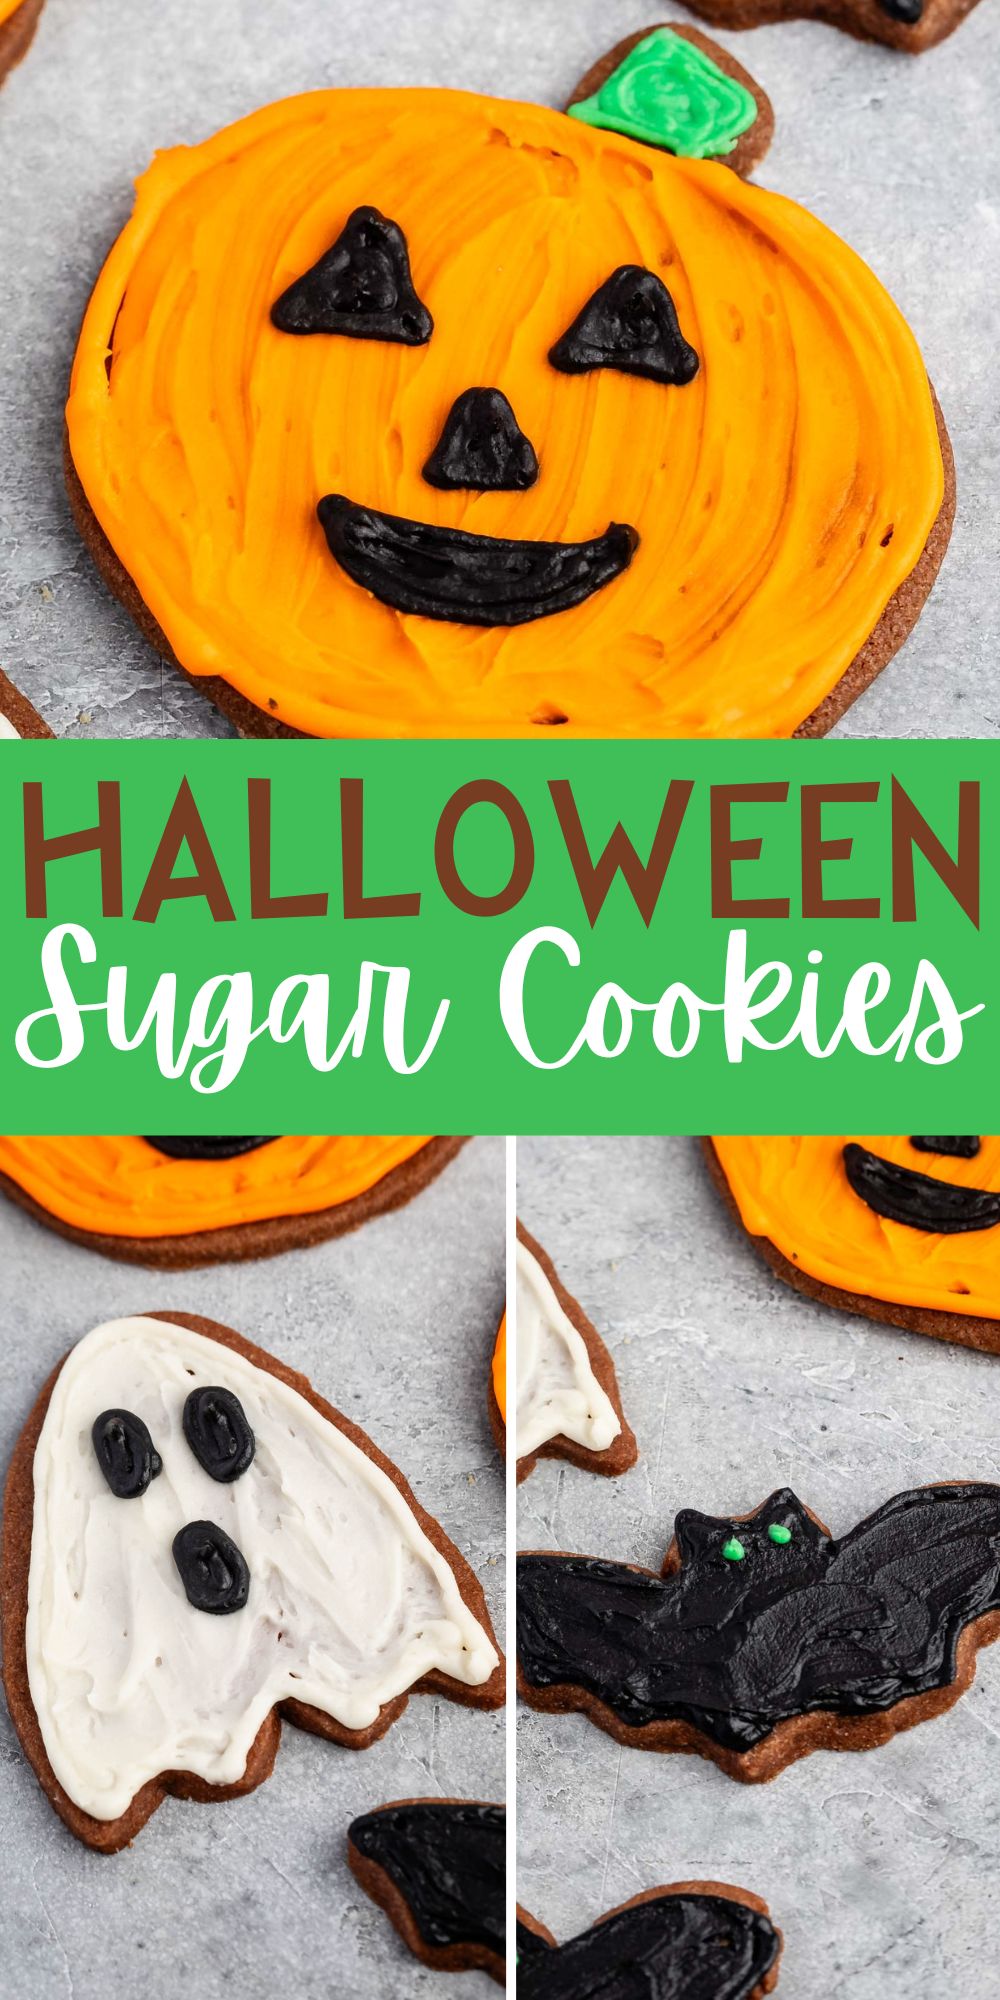 Halloween sugar cookies creations, cookie, Sugar cookie, airbrush, sale, Get a cookie airbrush kit here:  There's just  something about decorating spooky sugar cookies that's so satisfying.  Thanks